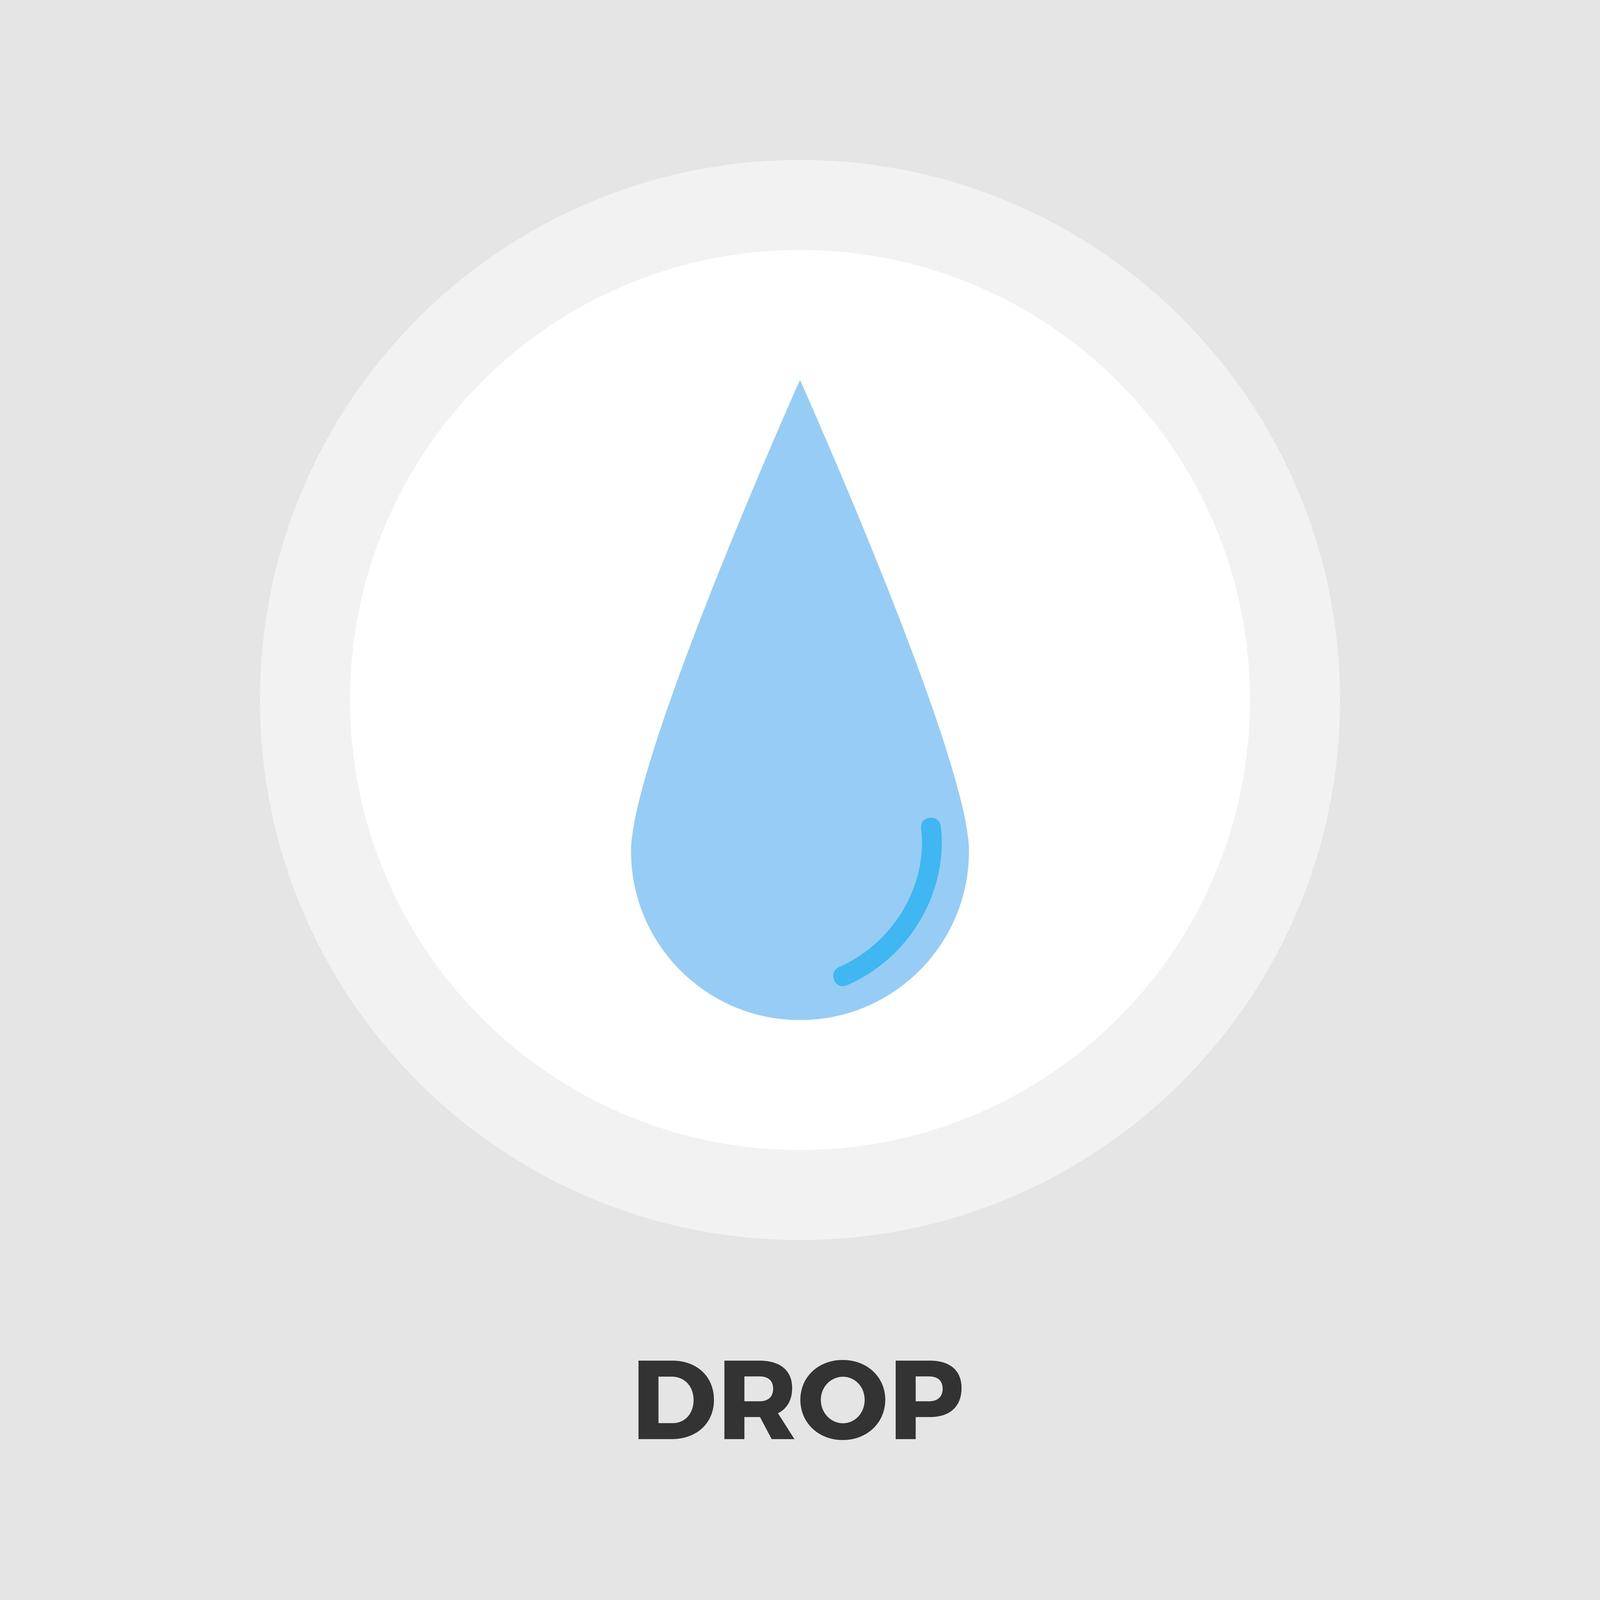 Drop icon vector. Flat icon isolated on the white background. Editable EPS file. Vector illustration.